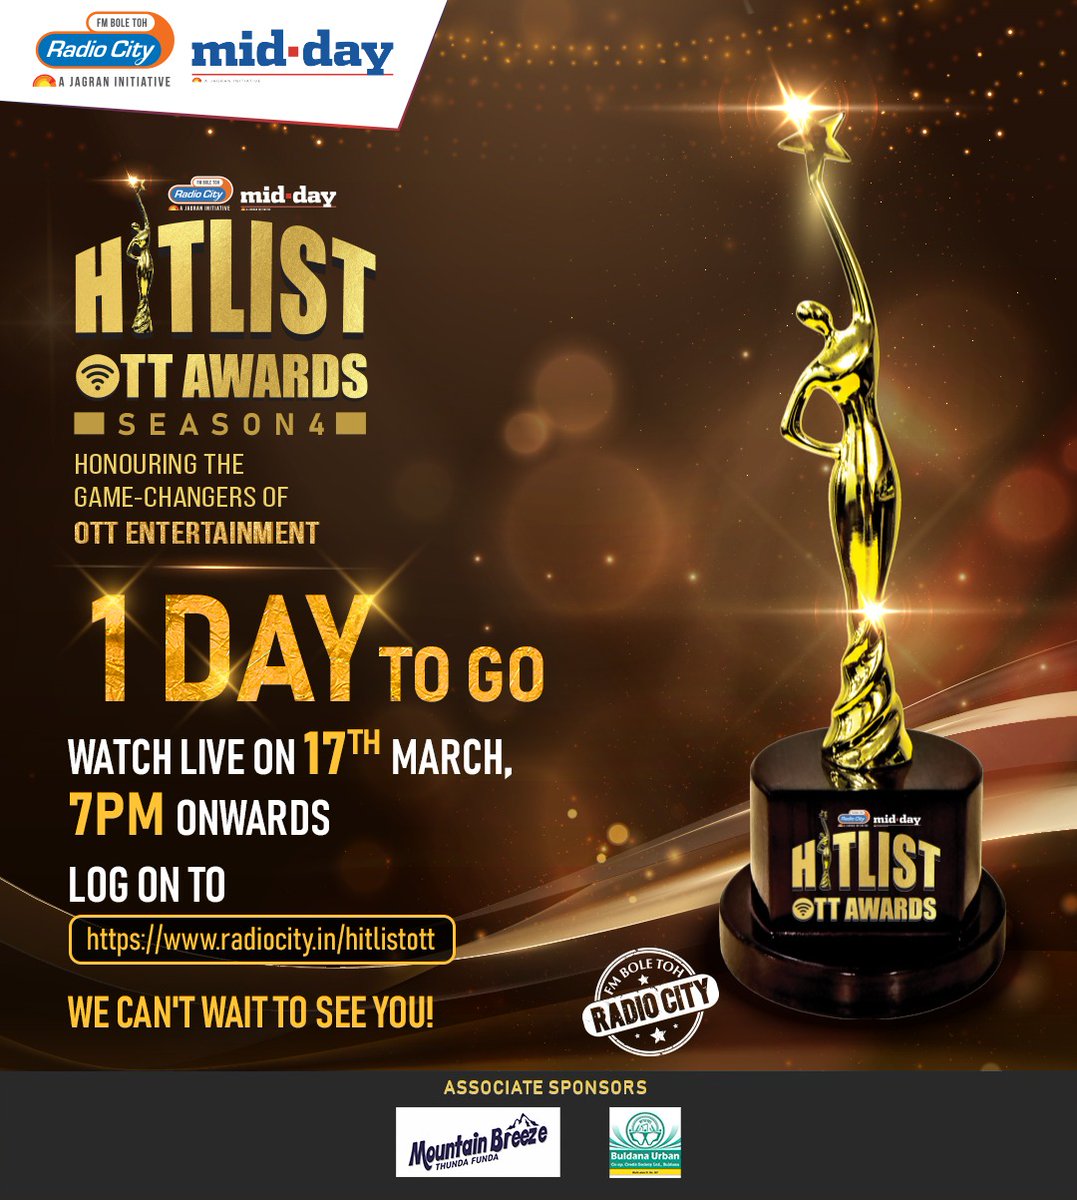 It's that time of the year again!

Just 1 day left for the #HitlistOTTAwards grand finale.
Watch us live on the 17th March 2023 to find out who won!

@salilacharya @mayankw14

radiocity.in/hitlistott

#HitlistOTTAwards #HitlistAwards #Radiocity #Entertainment #OTTAwards